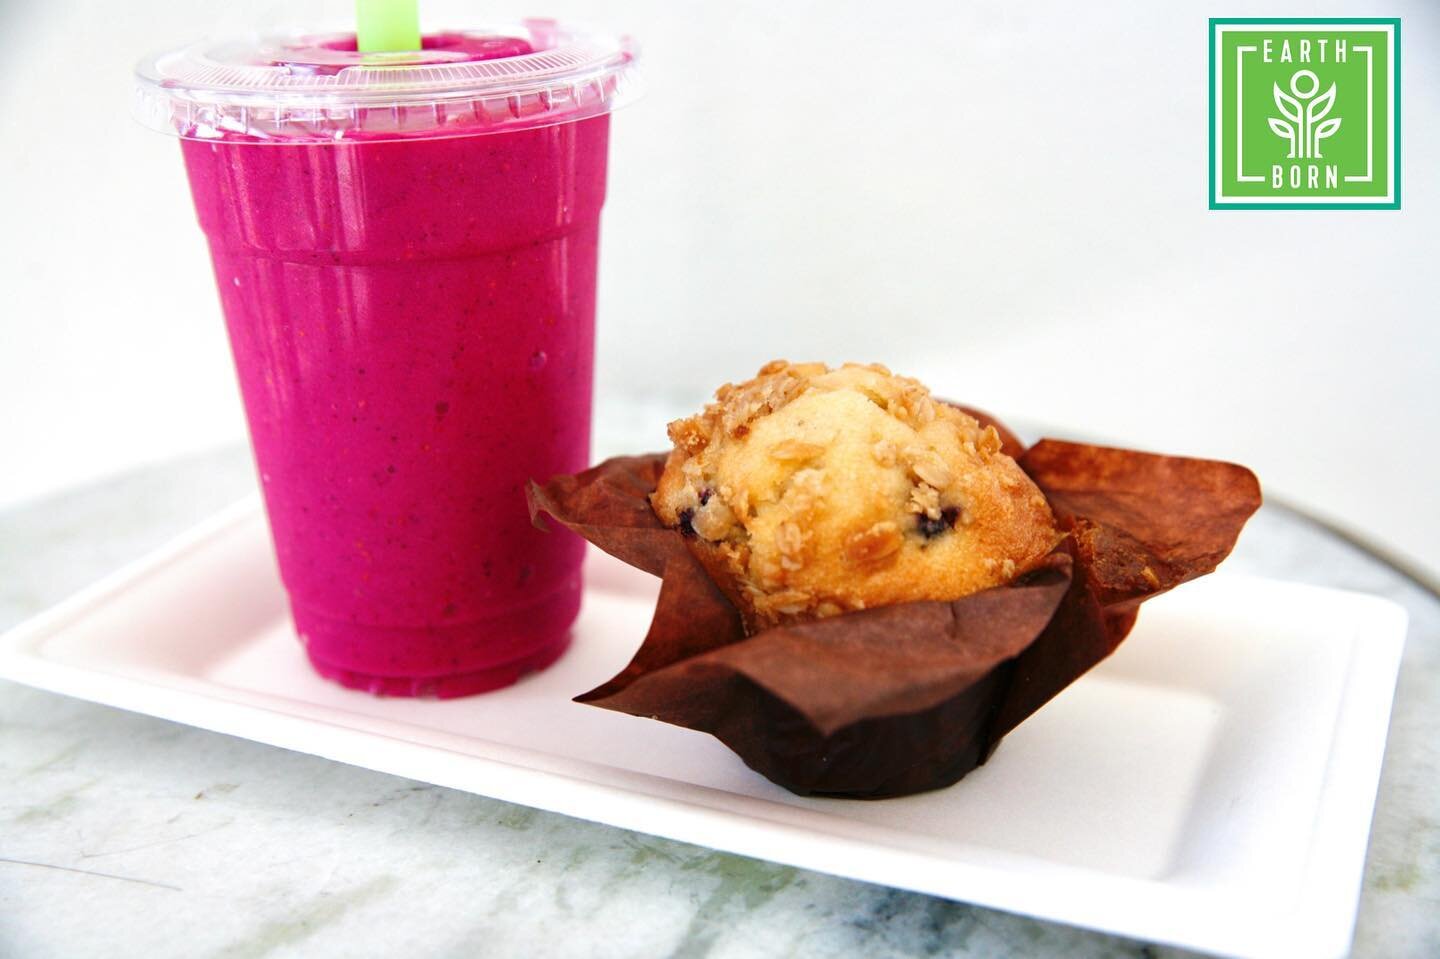 The perfect snack or breakfast combo&hellip;An Earth Born smoothie blend and one of our yogurt parfait muffins&hellip;Yum!